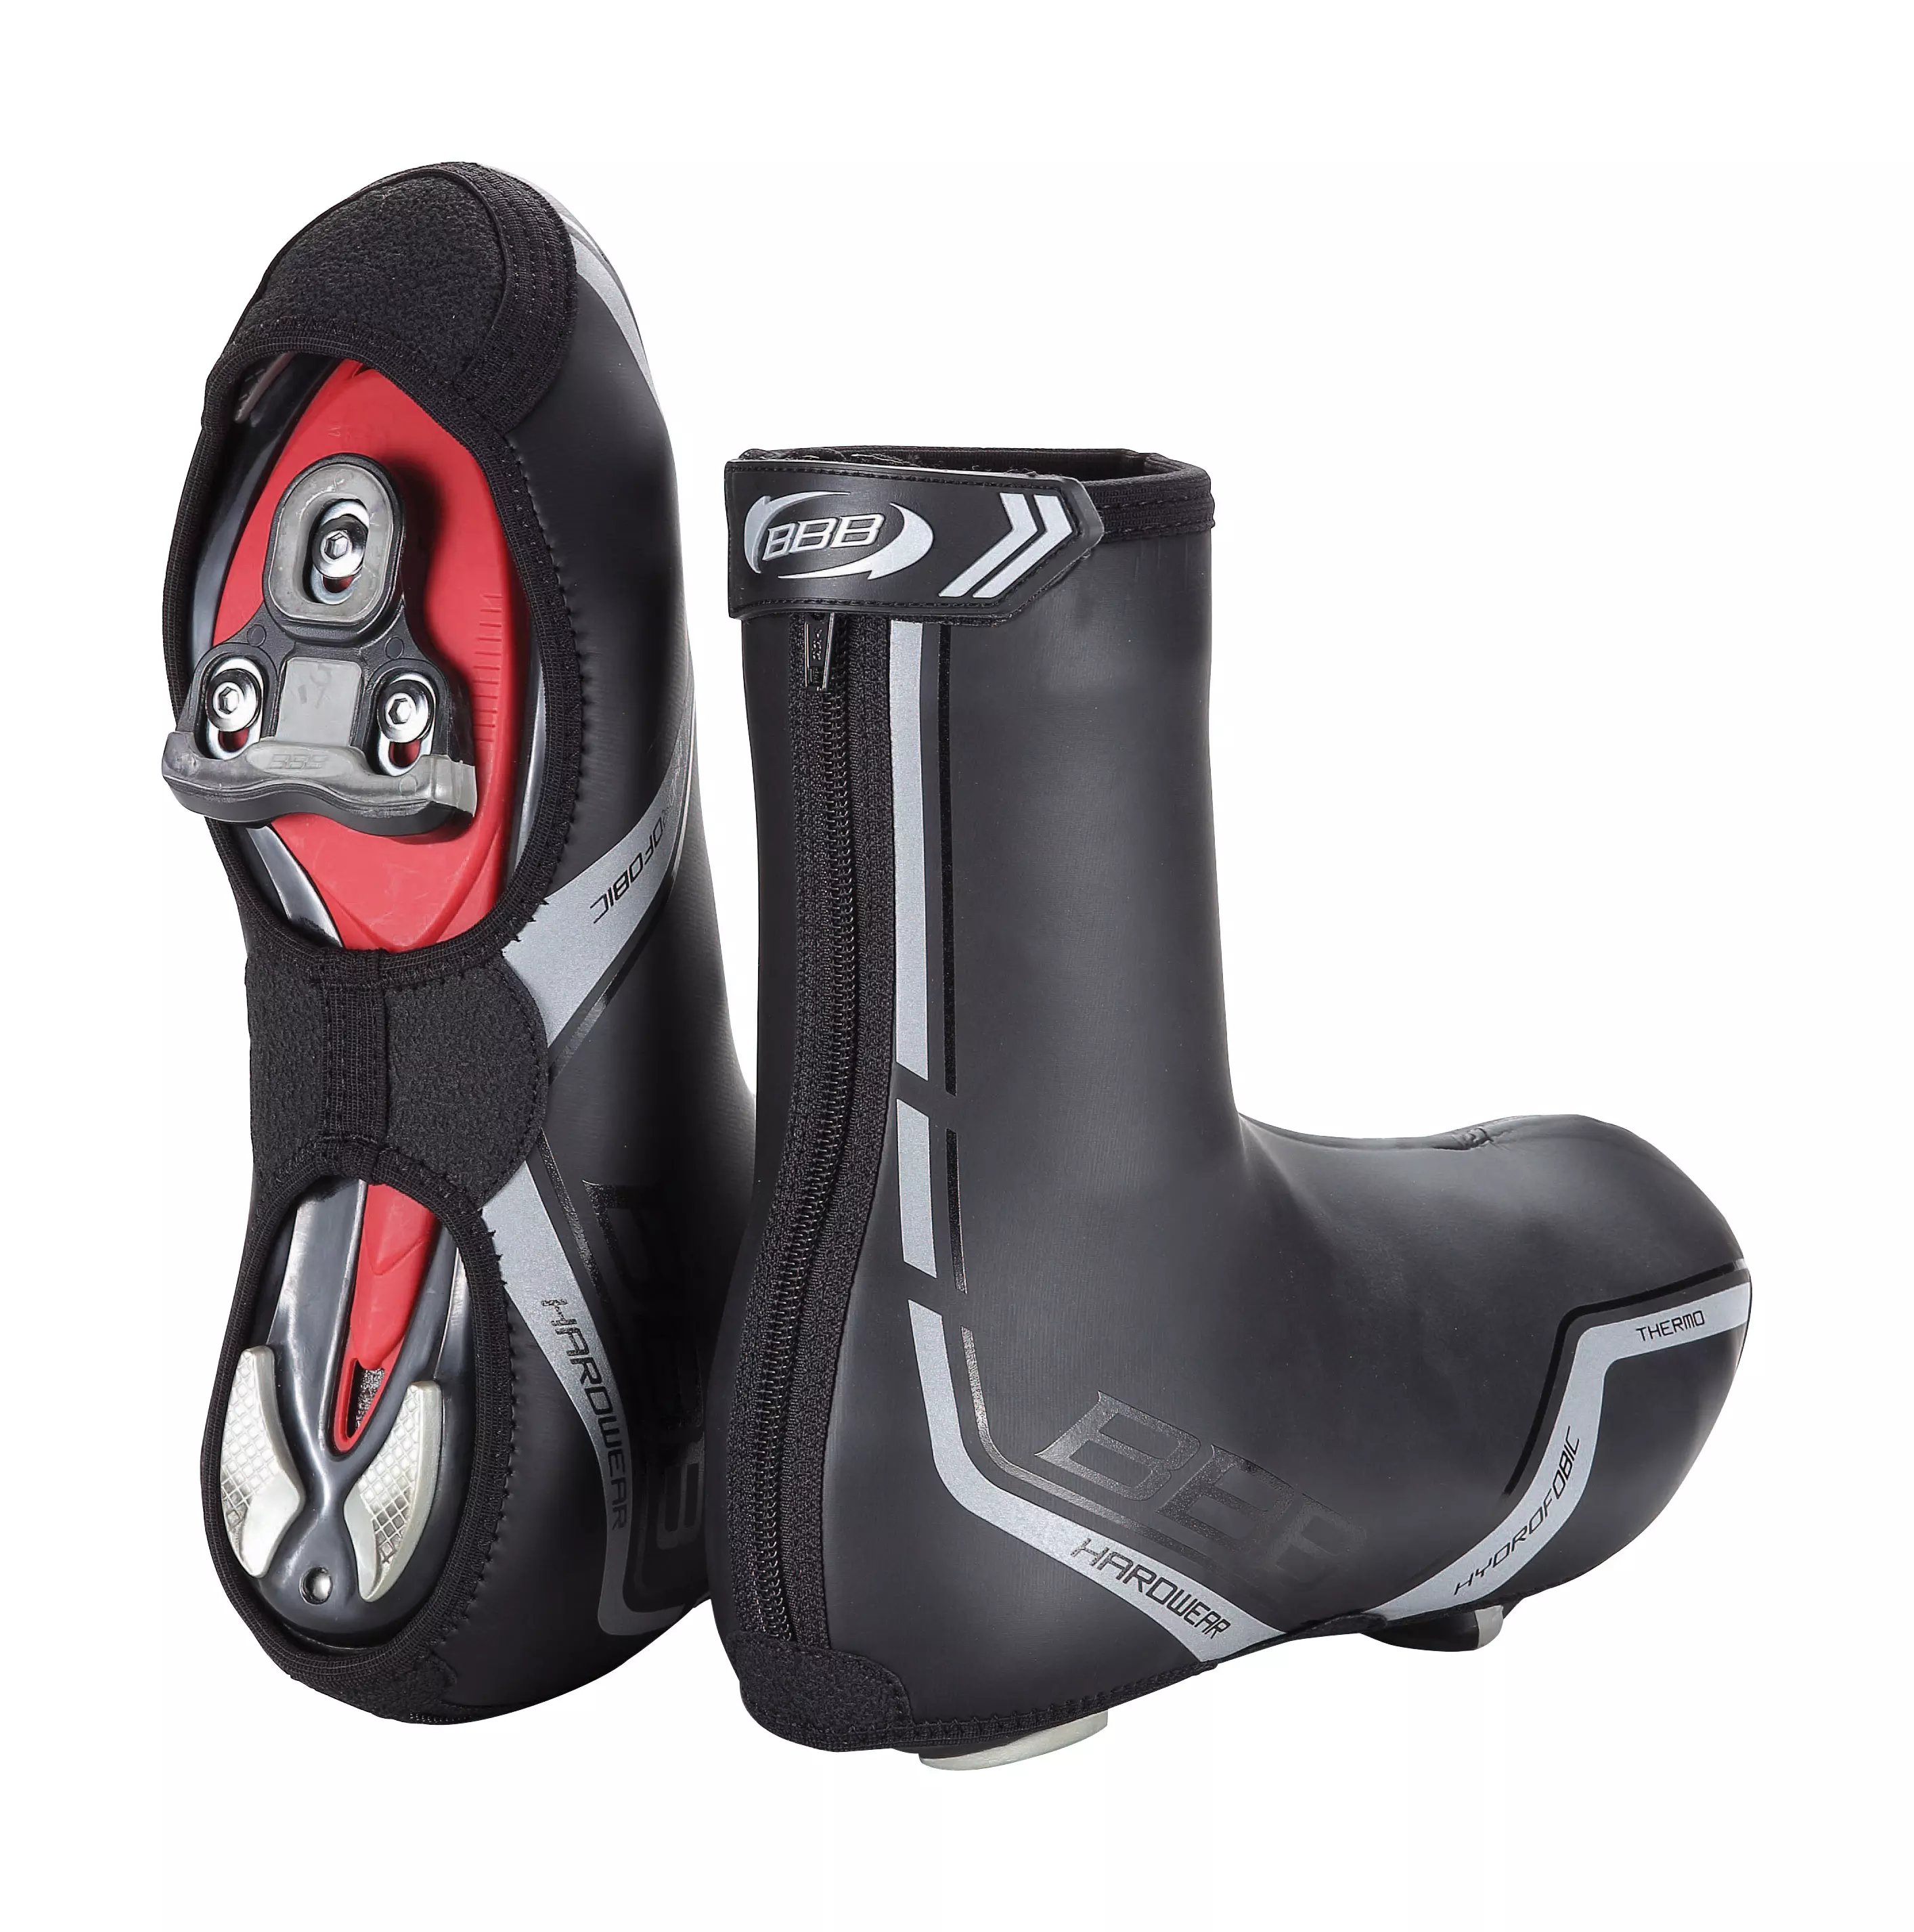 bbb cycling overshoes